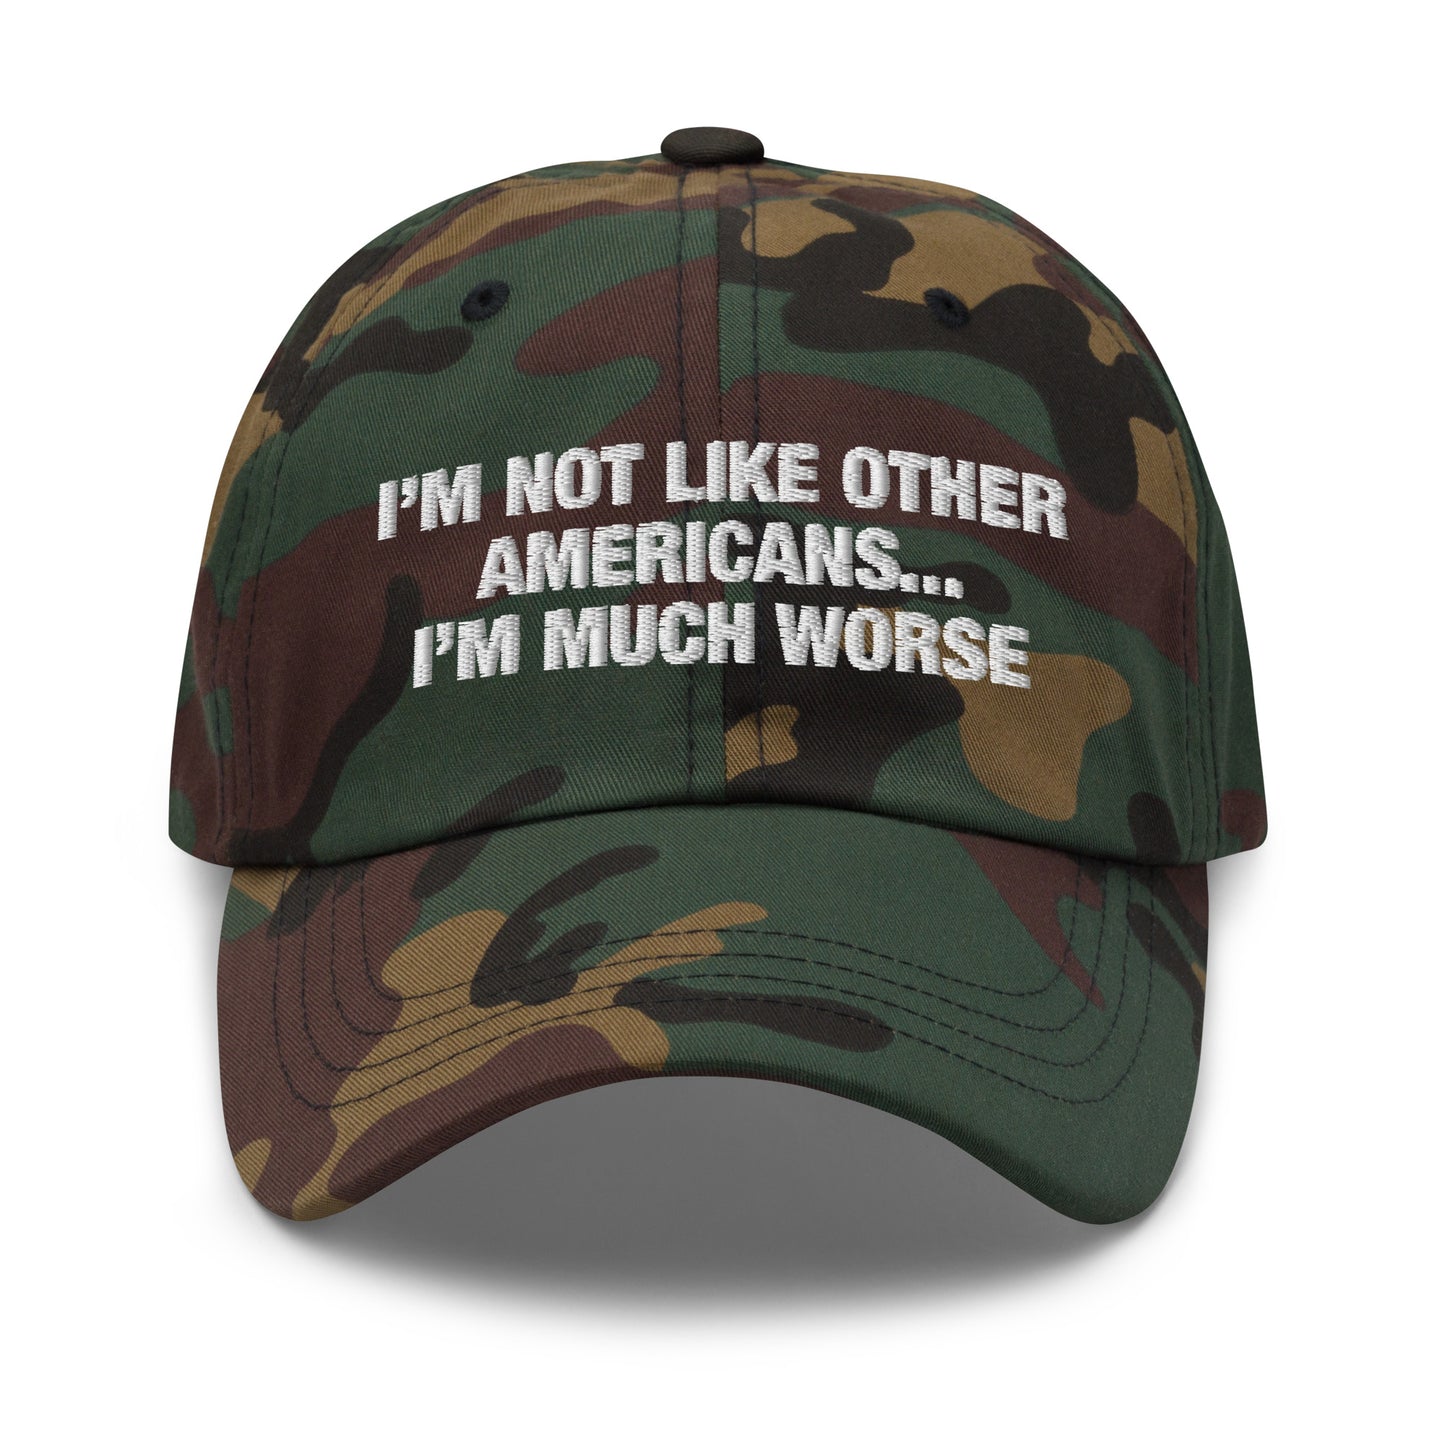 I'm Not Like Other Americans (I'm Worse) hat